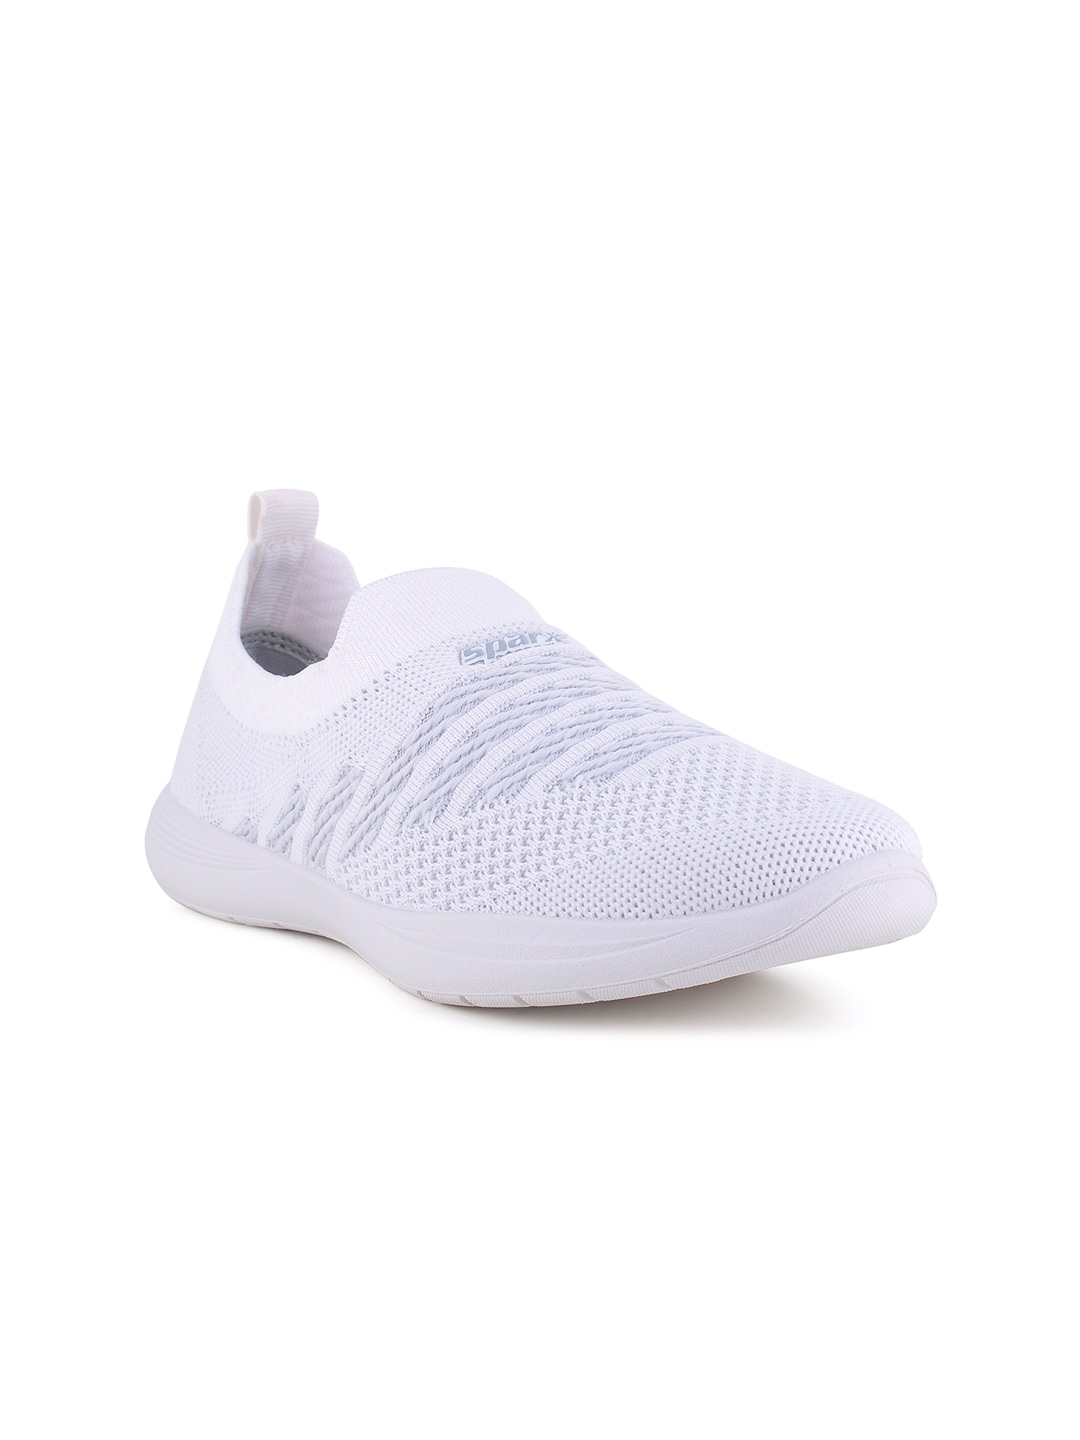 Sparx Women White Woven Design Slip-On Sneakers Casual Shoes Price in India